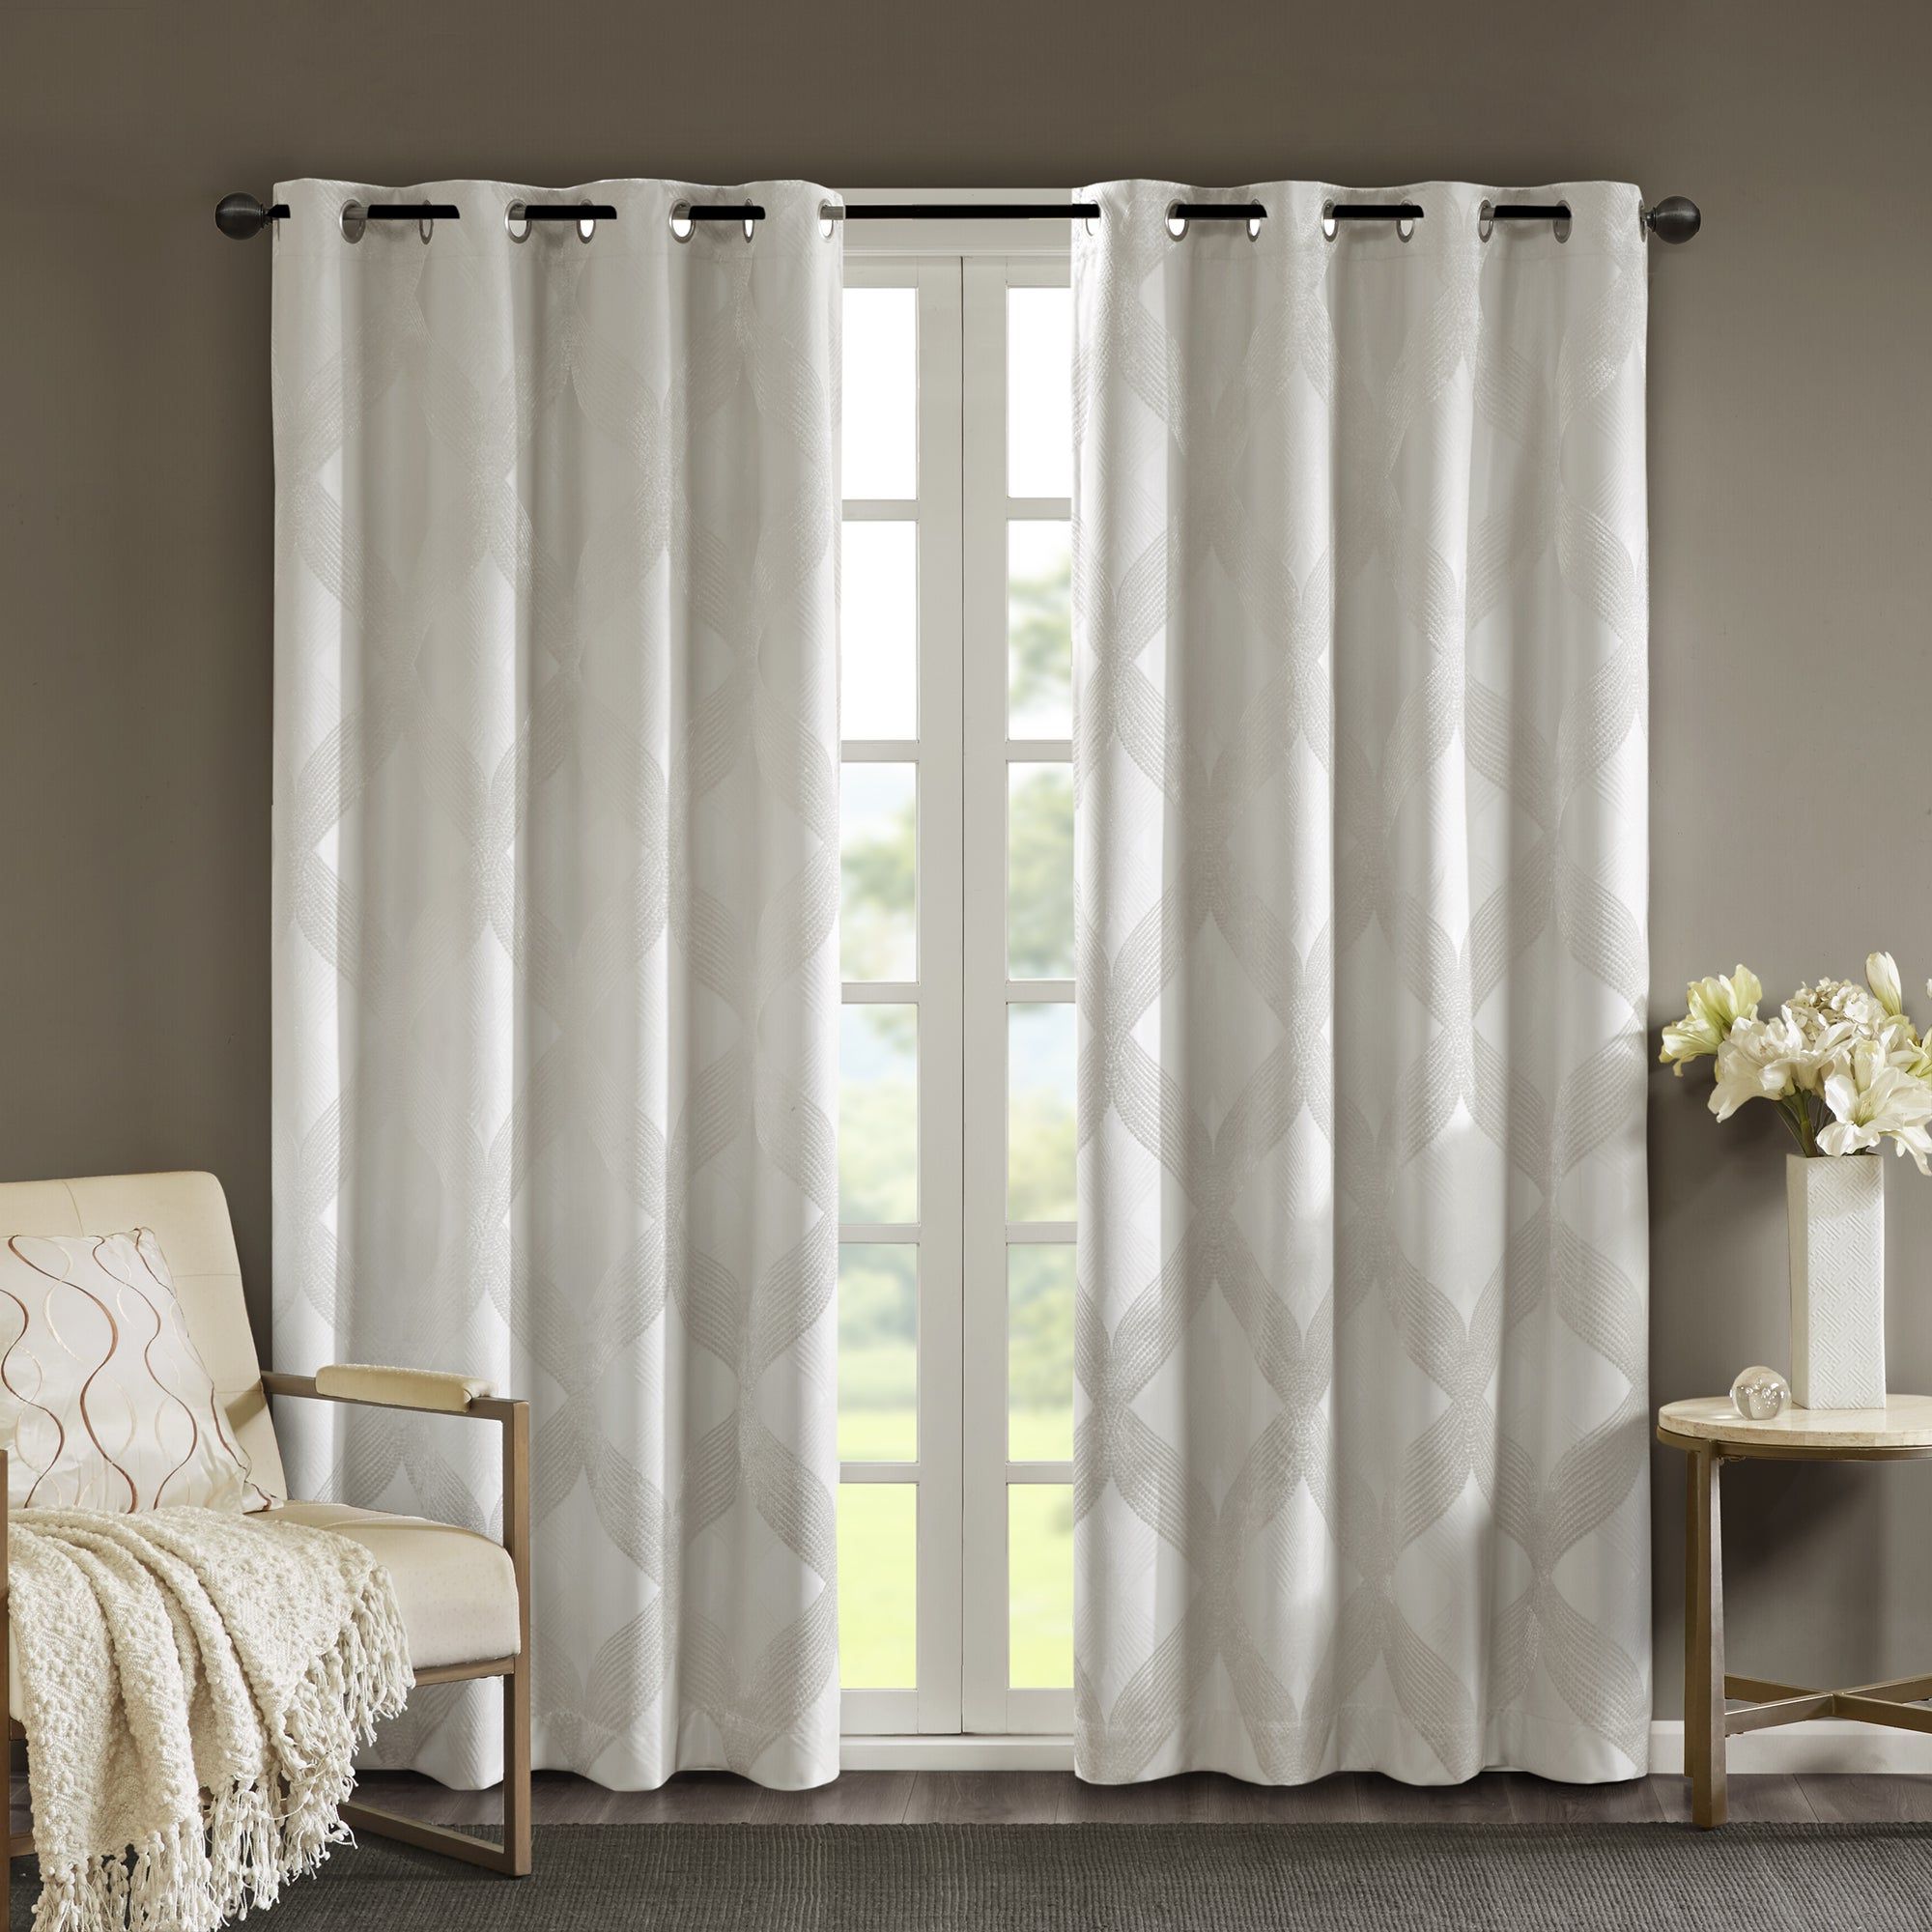 Sunsmart Abel Ogee Knitted Jacquard Total Blackout Curtain Panel With Widely Used Sunsmart Abel Ogee Knitted Jacquard Total Blackout Curtain Panels (View 1 of 20)